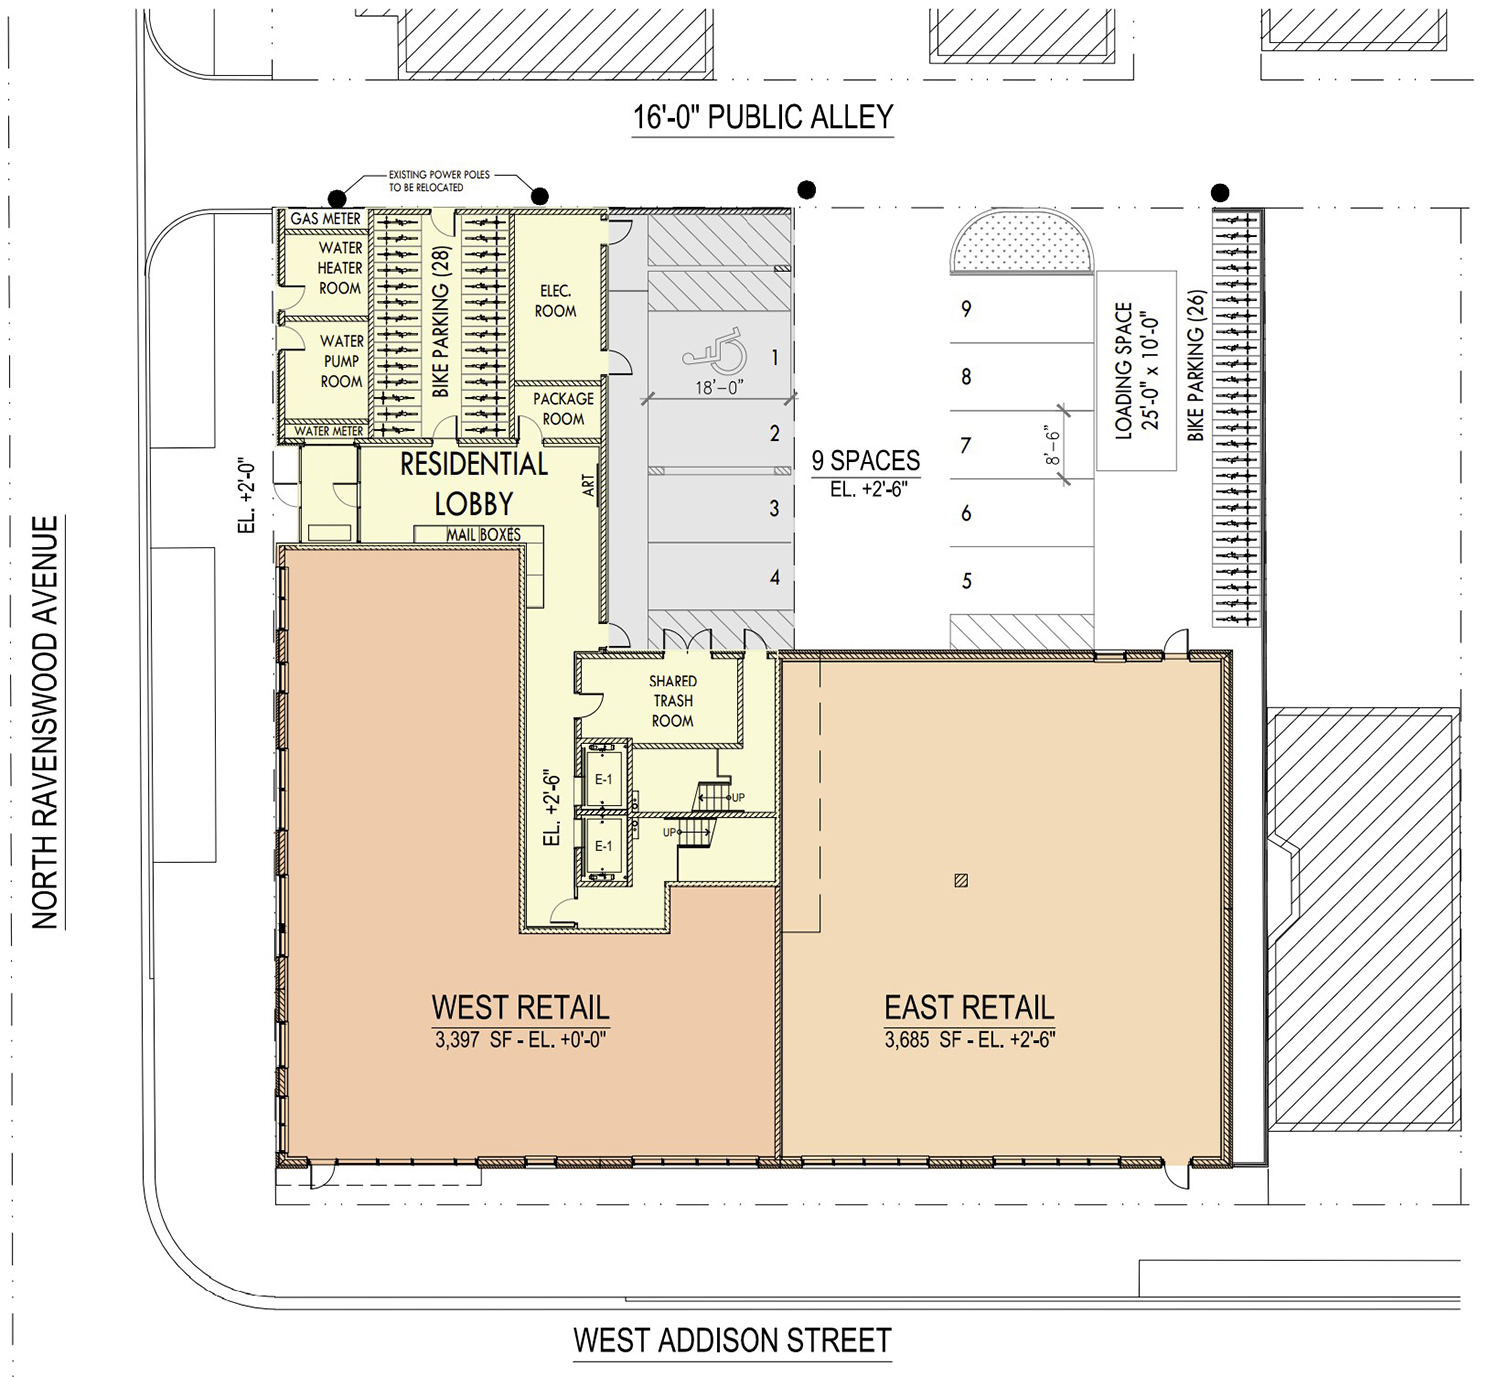 Ground Floor Plan for 3601 N Ravenswood Avenue. Drawing by Hirsch MPG